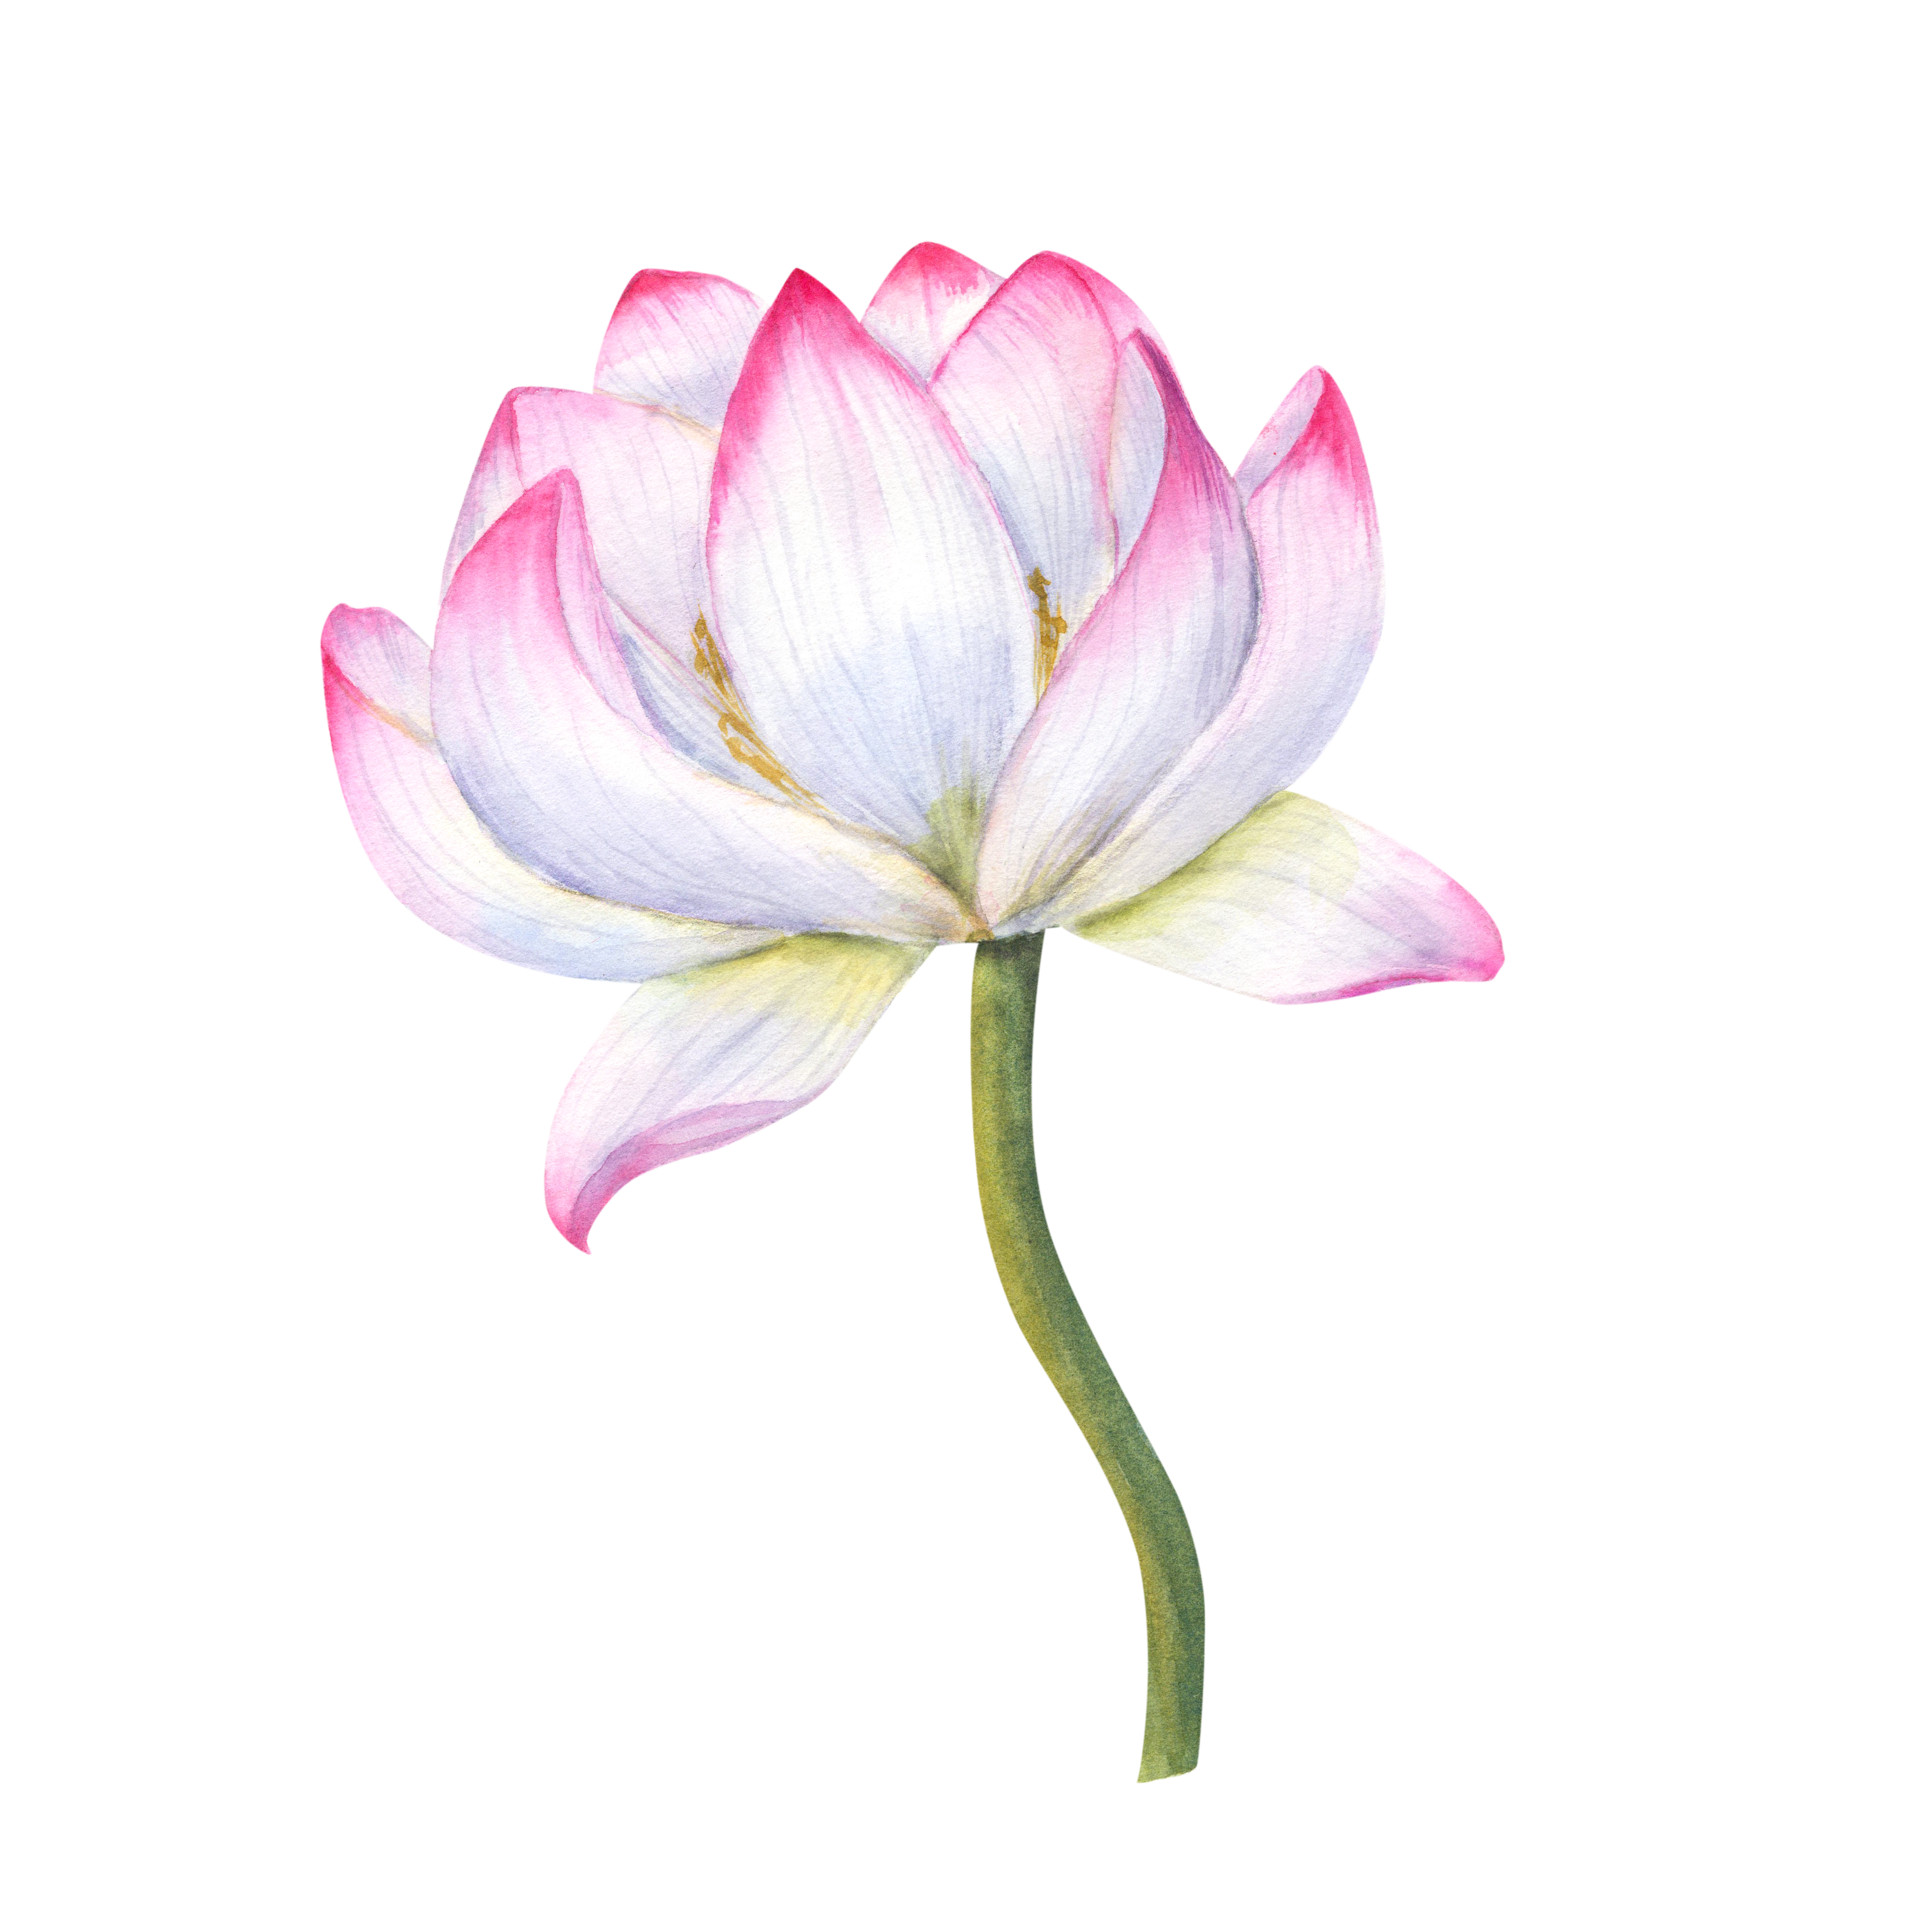 Pink blooming Water Lily with green stem. Lotus flower, Indian